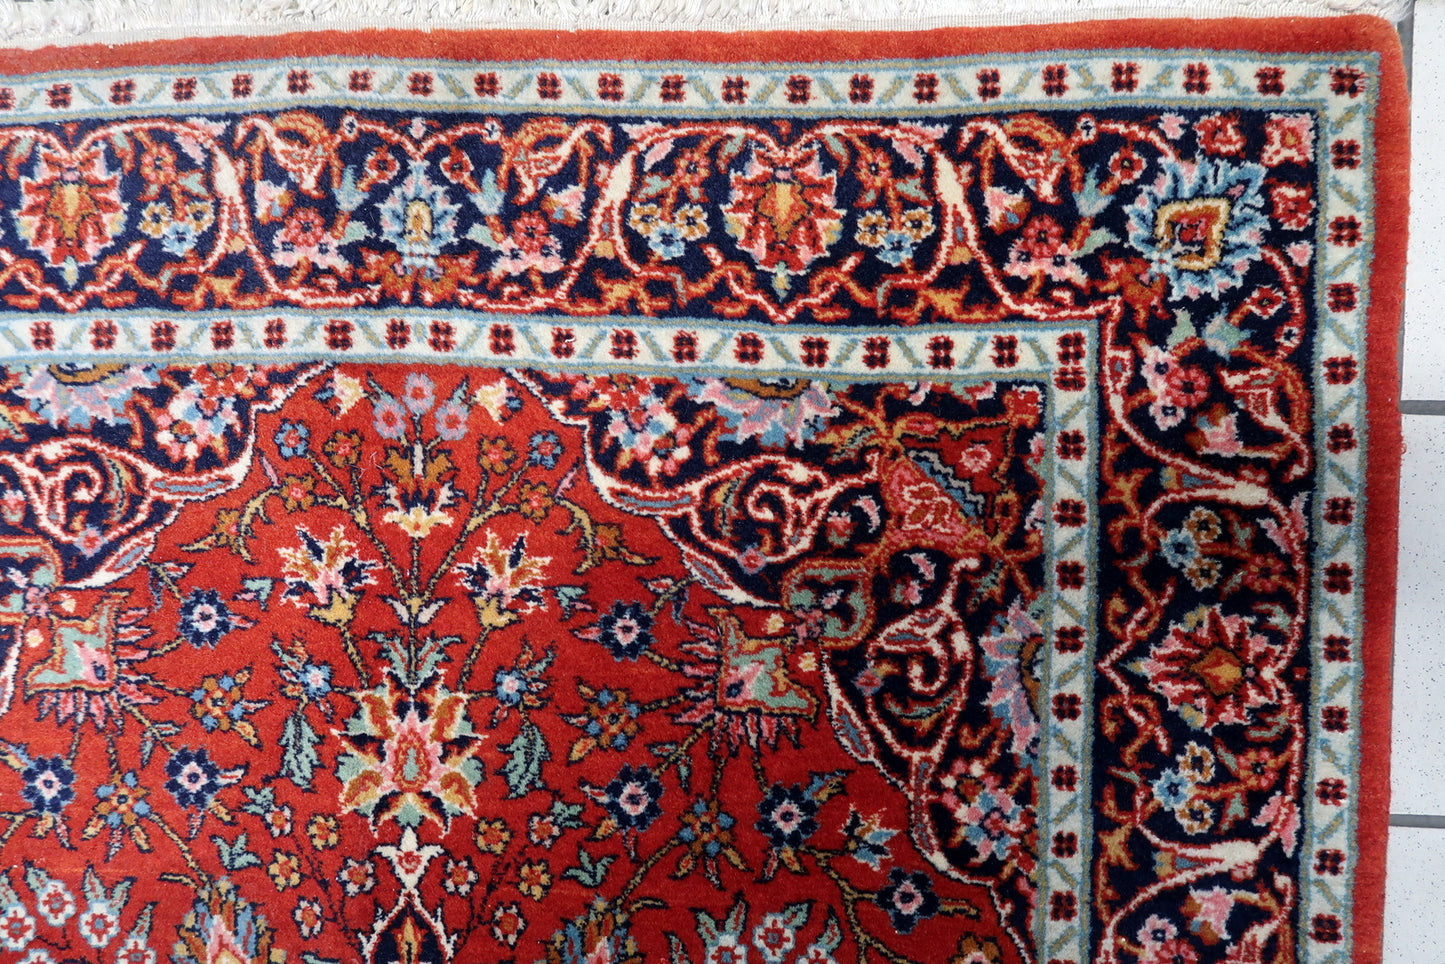 Close-up of intricate floral patterns and vibrant colors on the antique Persian Kashan rug.